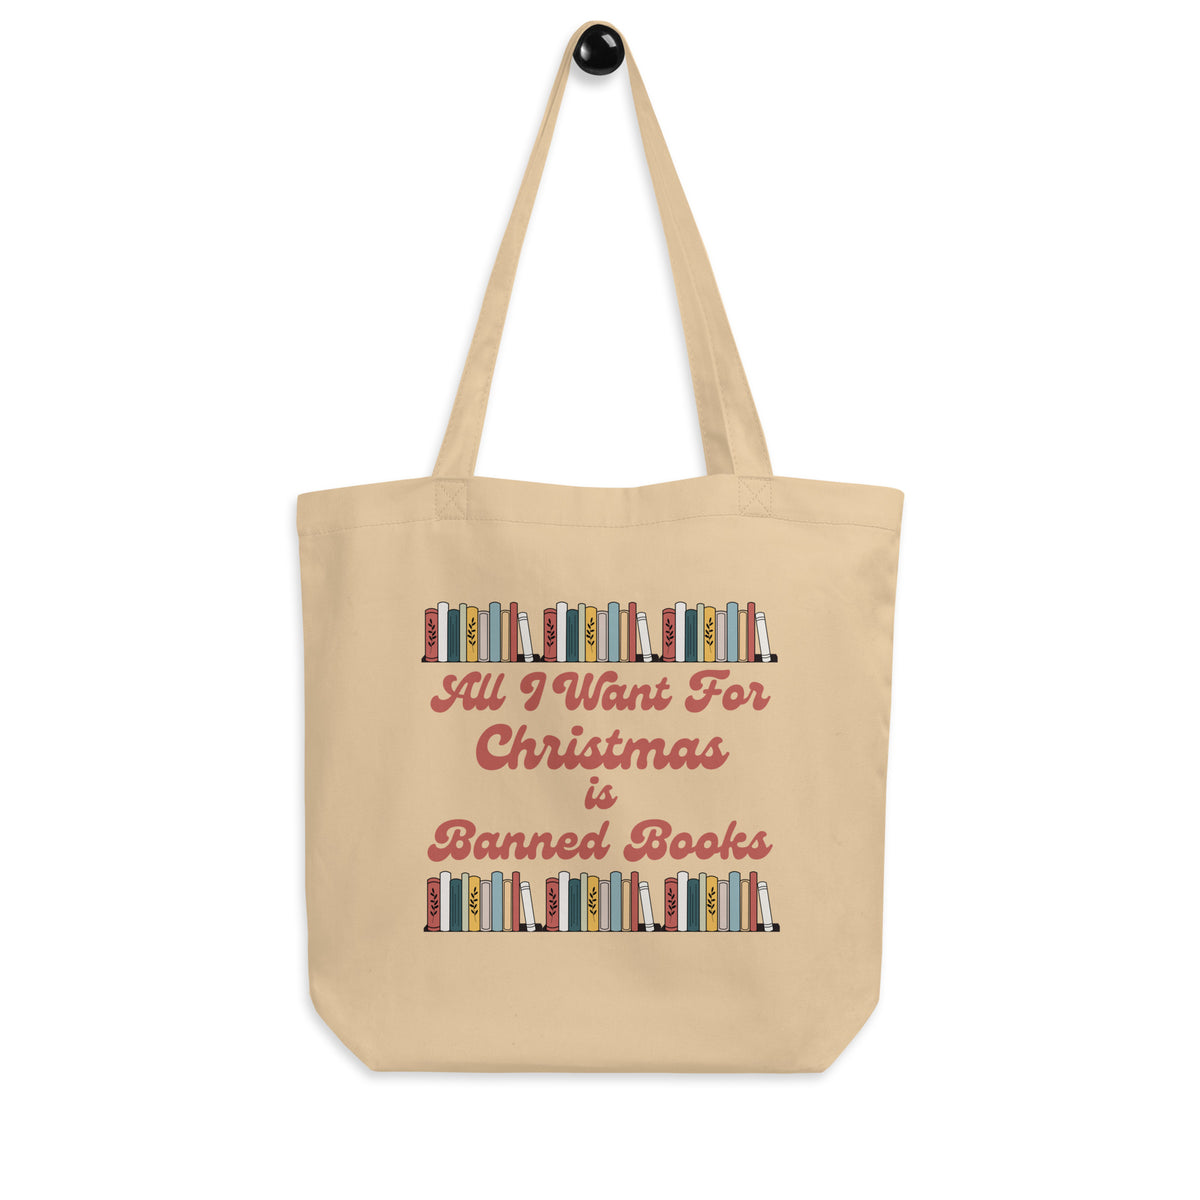 All I Want For Christmas is Banned Books Eco Tote Bag